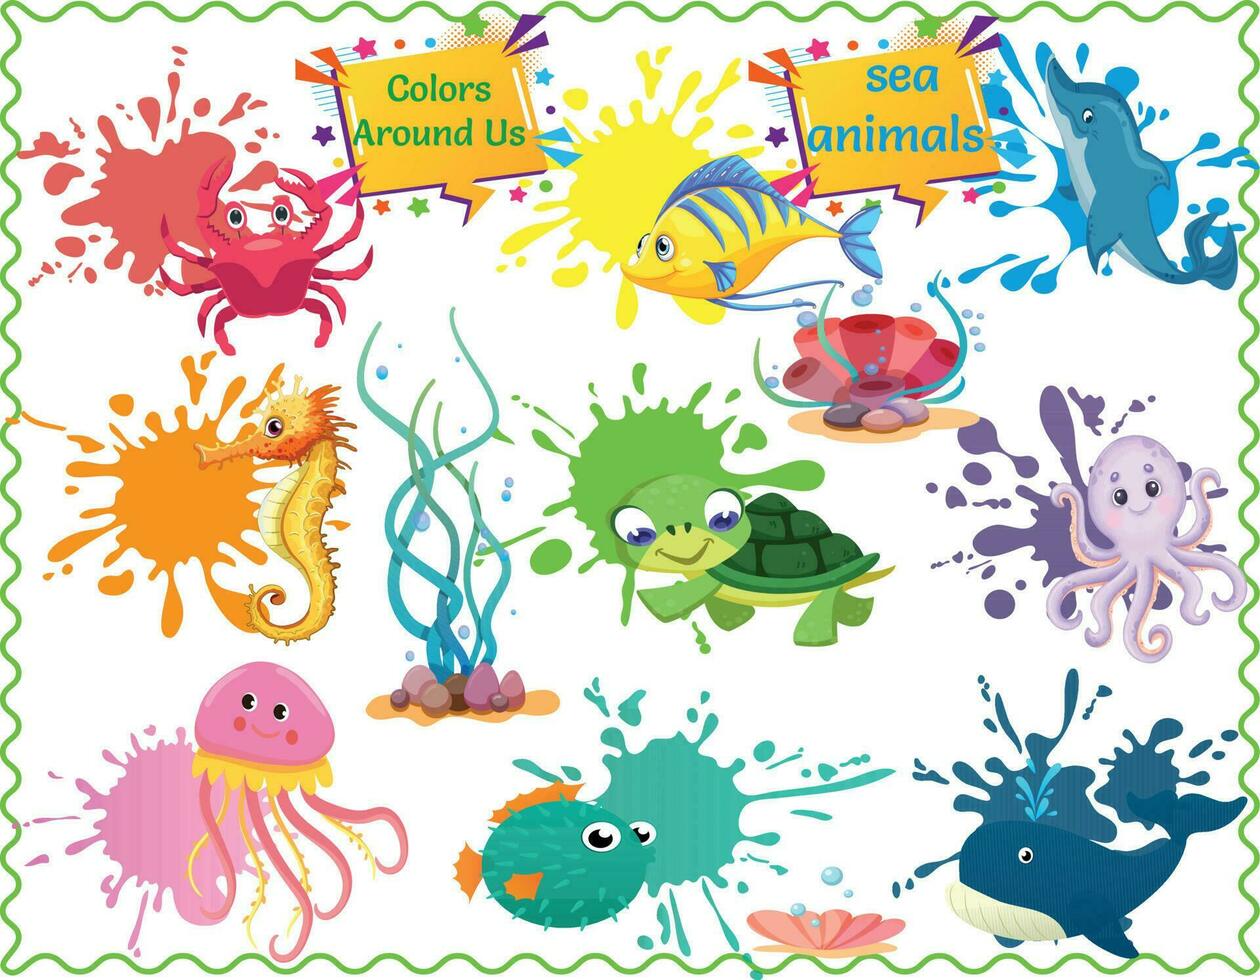 Kids' Sea Animals Poster, Look In Color, Rainbow-inspired Sea Poster, Learn Sea Animals Poster Childrens, Wall Chart Educational Childs vector